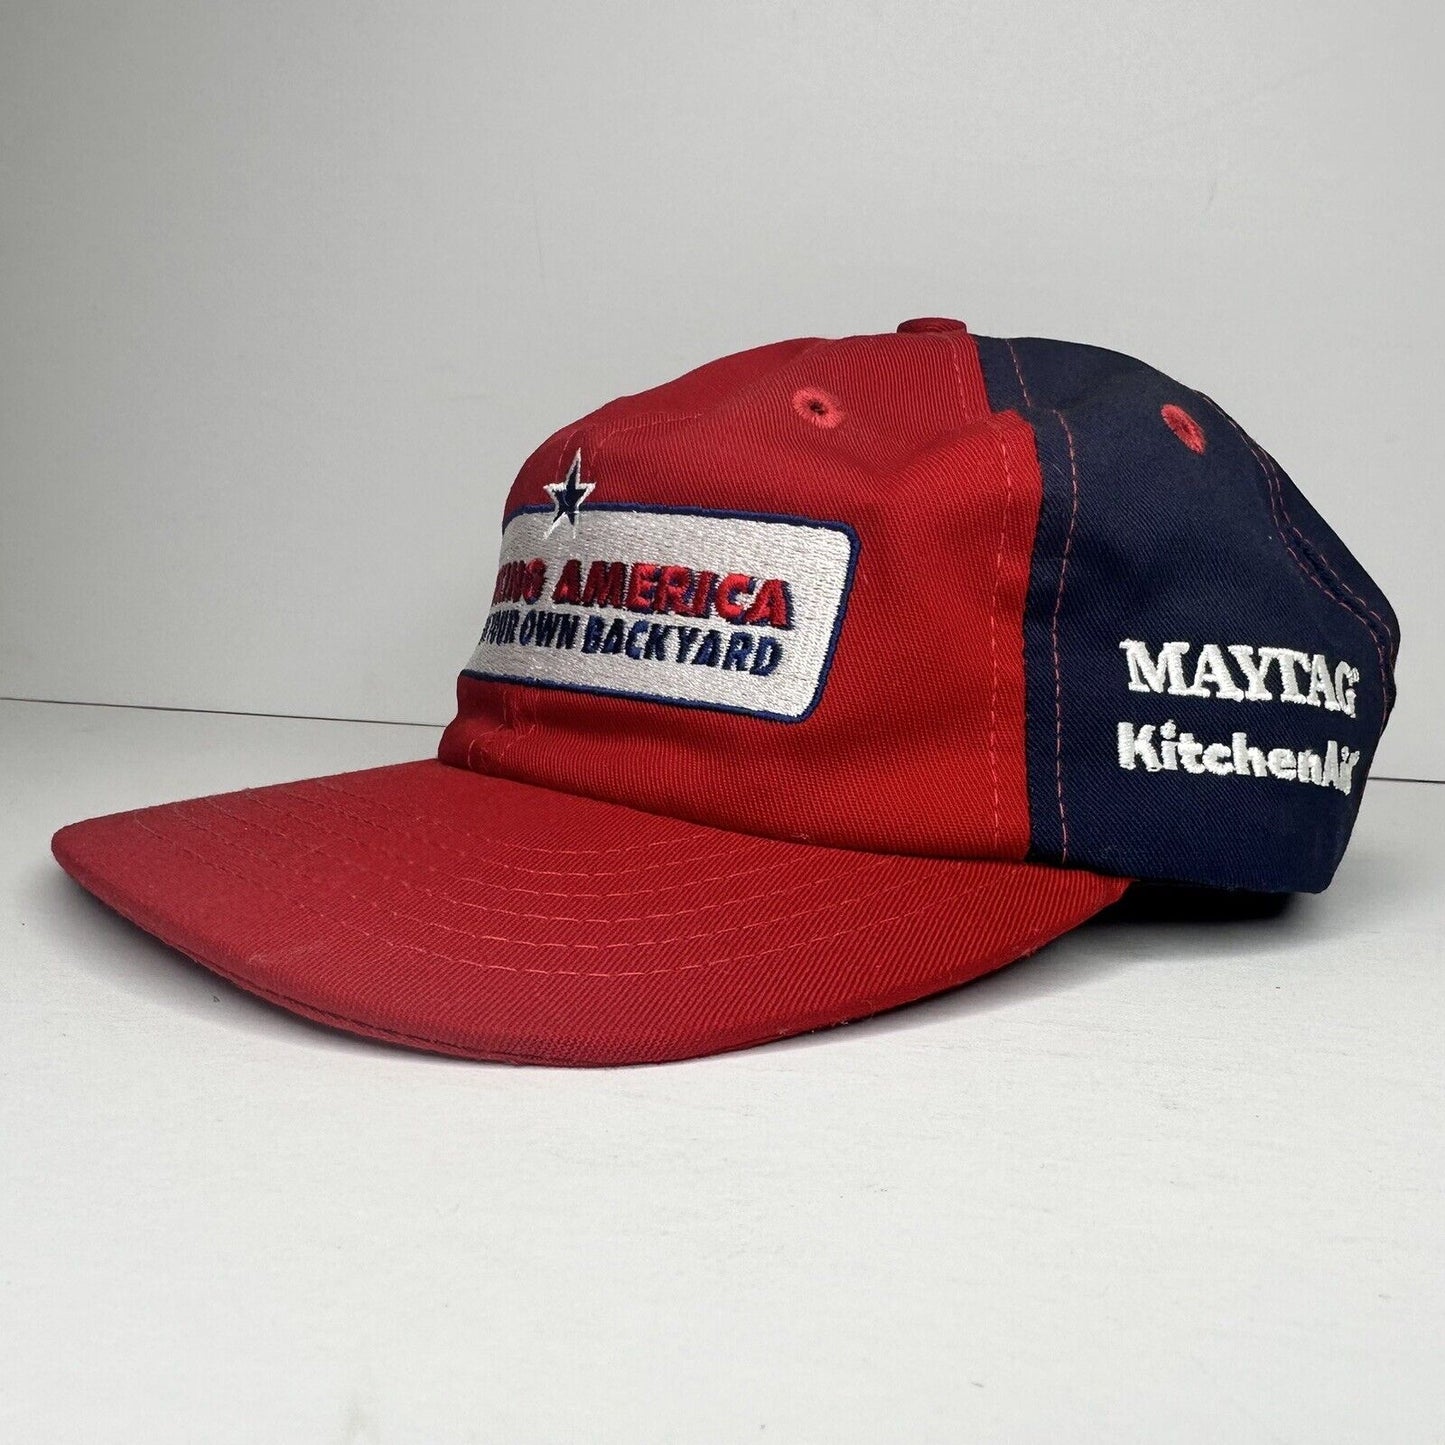 Vintage “Backing America From Your Own Backyard” Trucker Hat- Whirlpool, Maytag, KitchenAid Sponsored - TreasuTiques